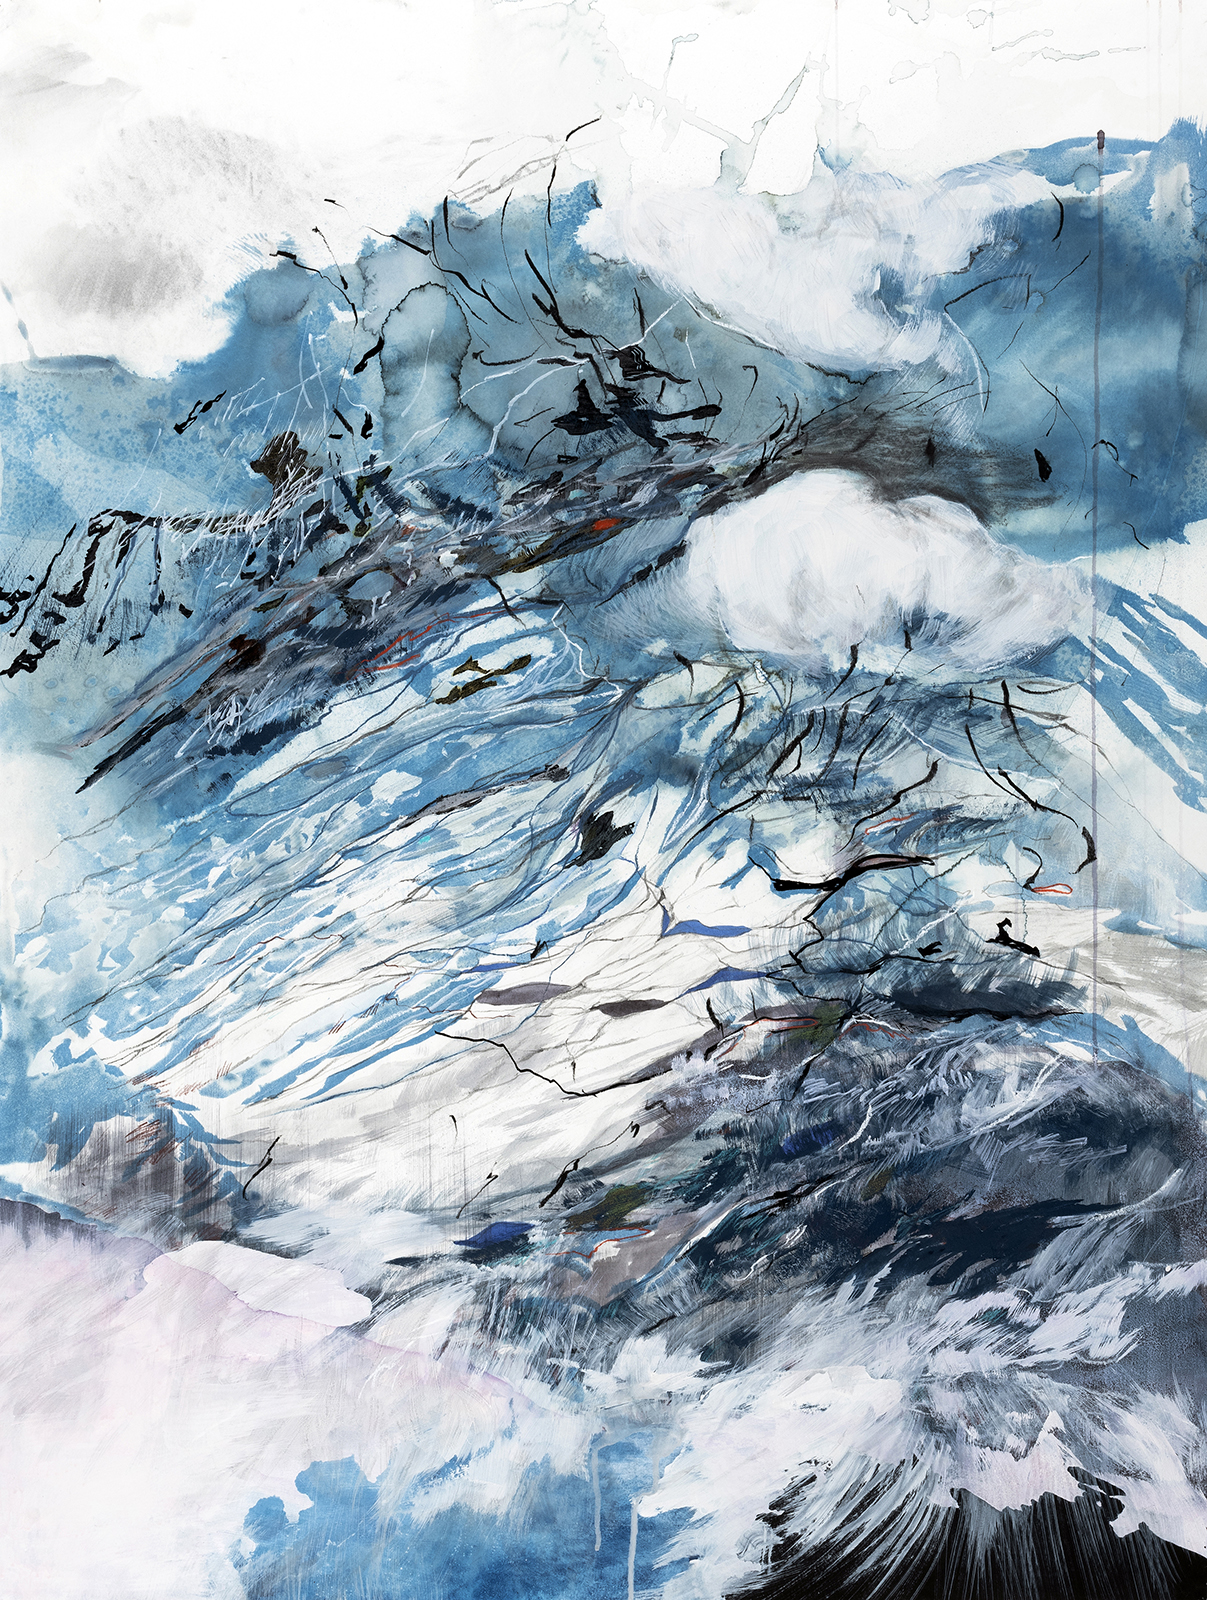  Terrain without Distance (61°30'53.44"N 142°54'39.92"W)  Cyanotype, Ink, acrylic, pencil, conte crayon, markers, and graphite on paper  2018  36 x 27.5”  Private Collection 